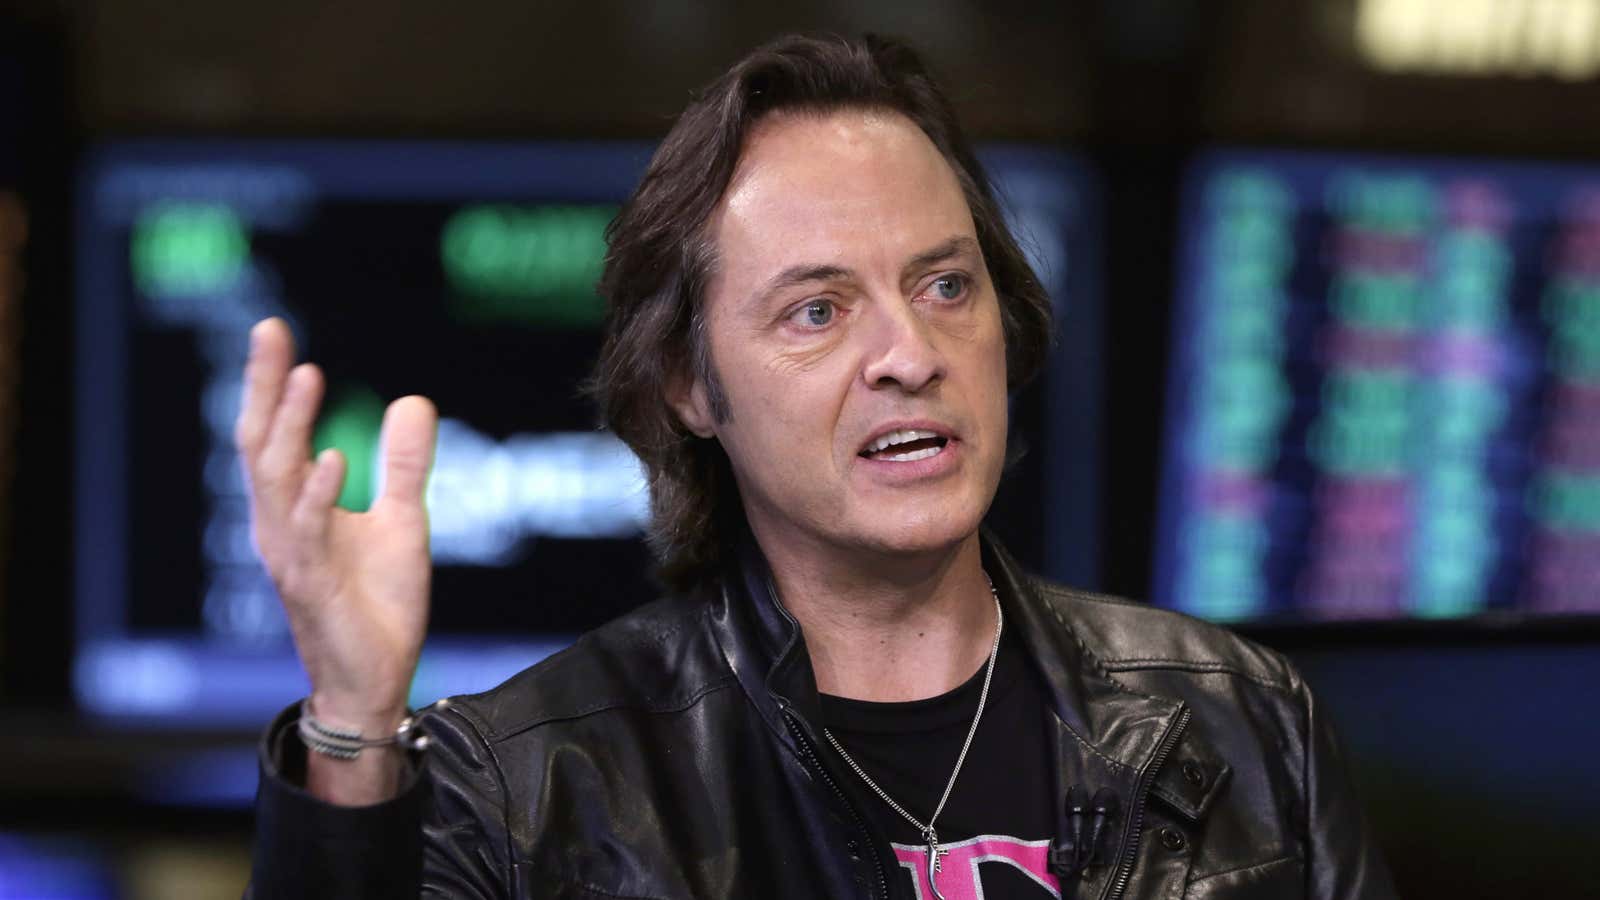 Legere is winning his bosses over.